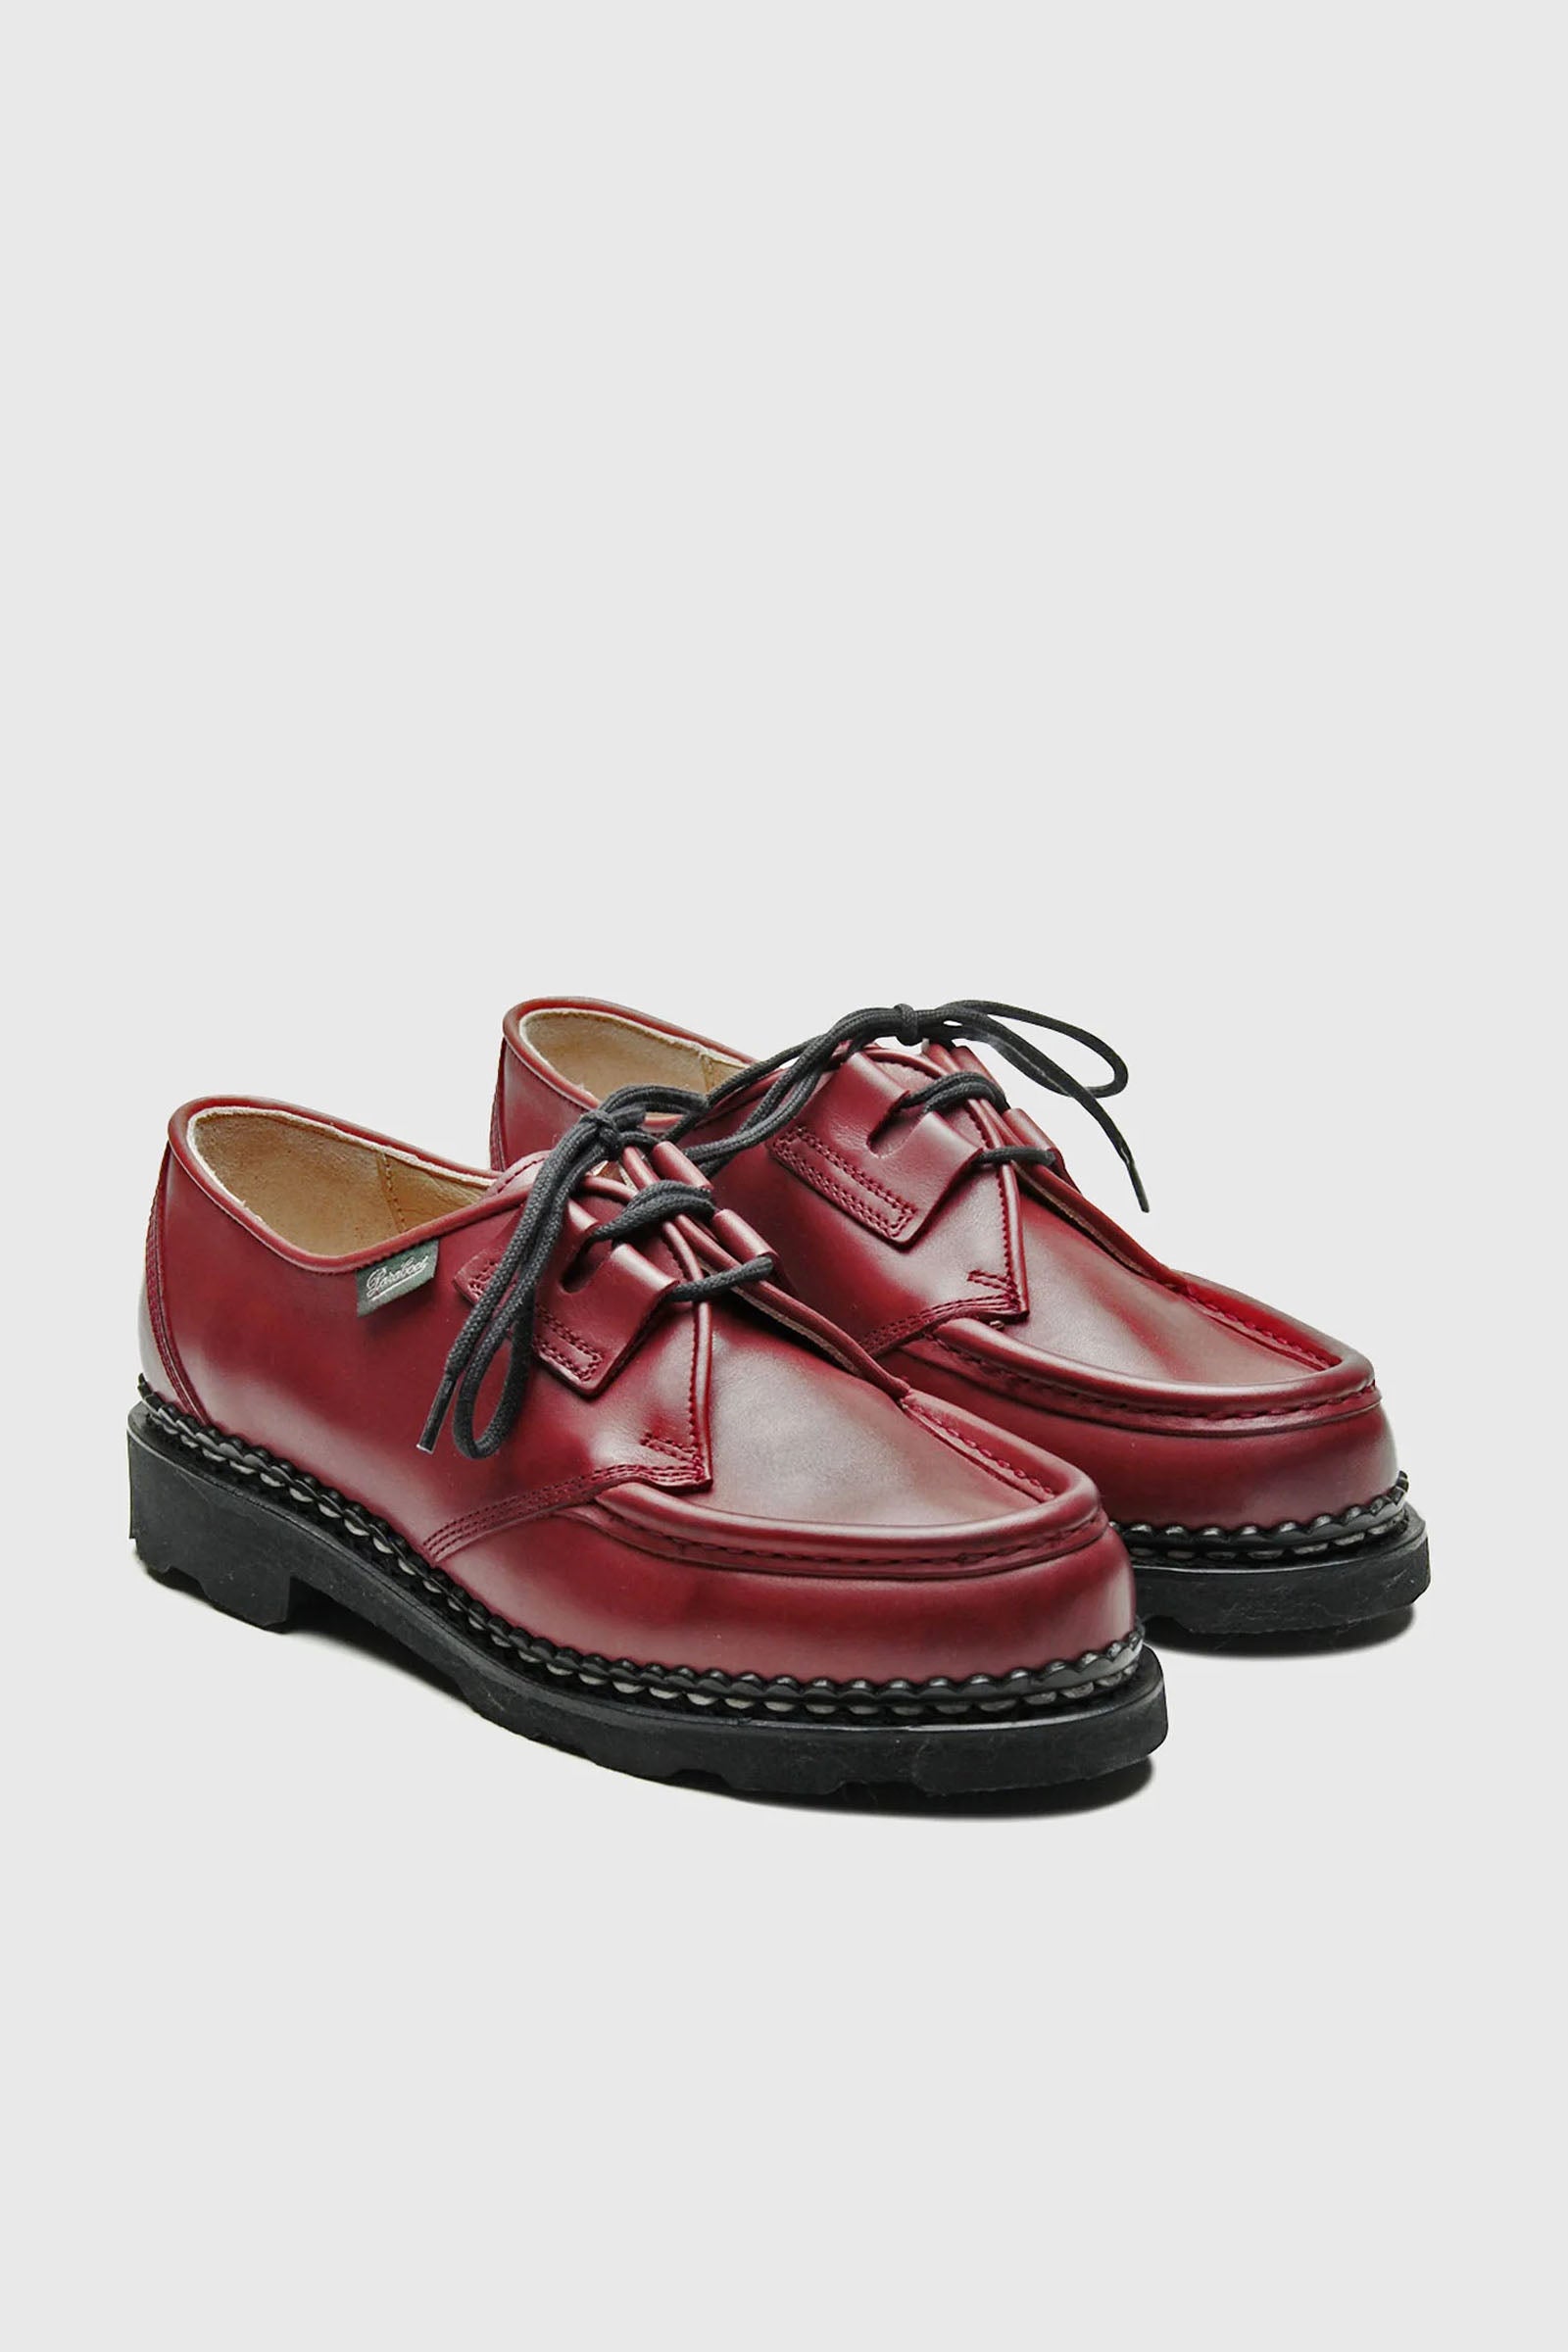 Beaubourg Lisse Rouge Derby Shoes - 2